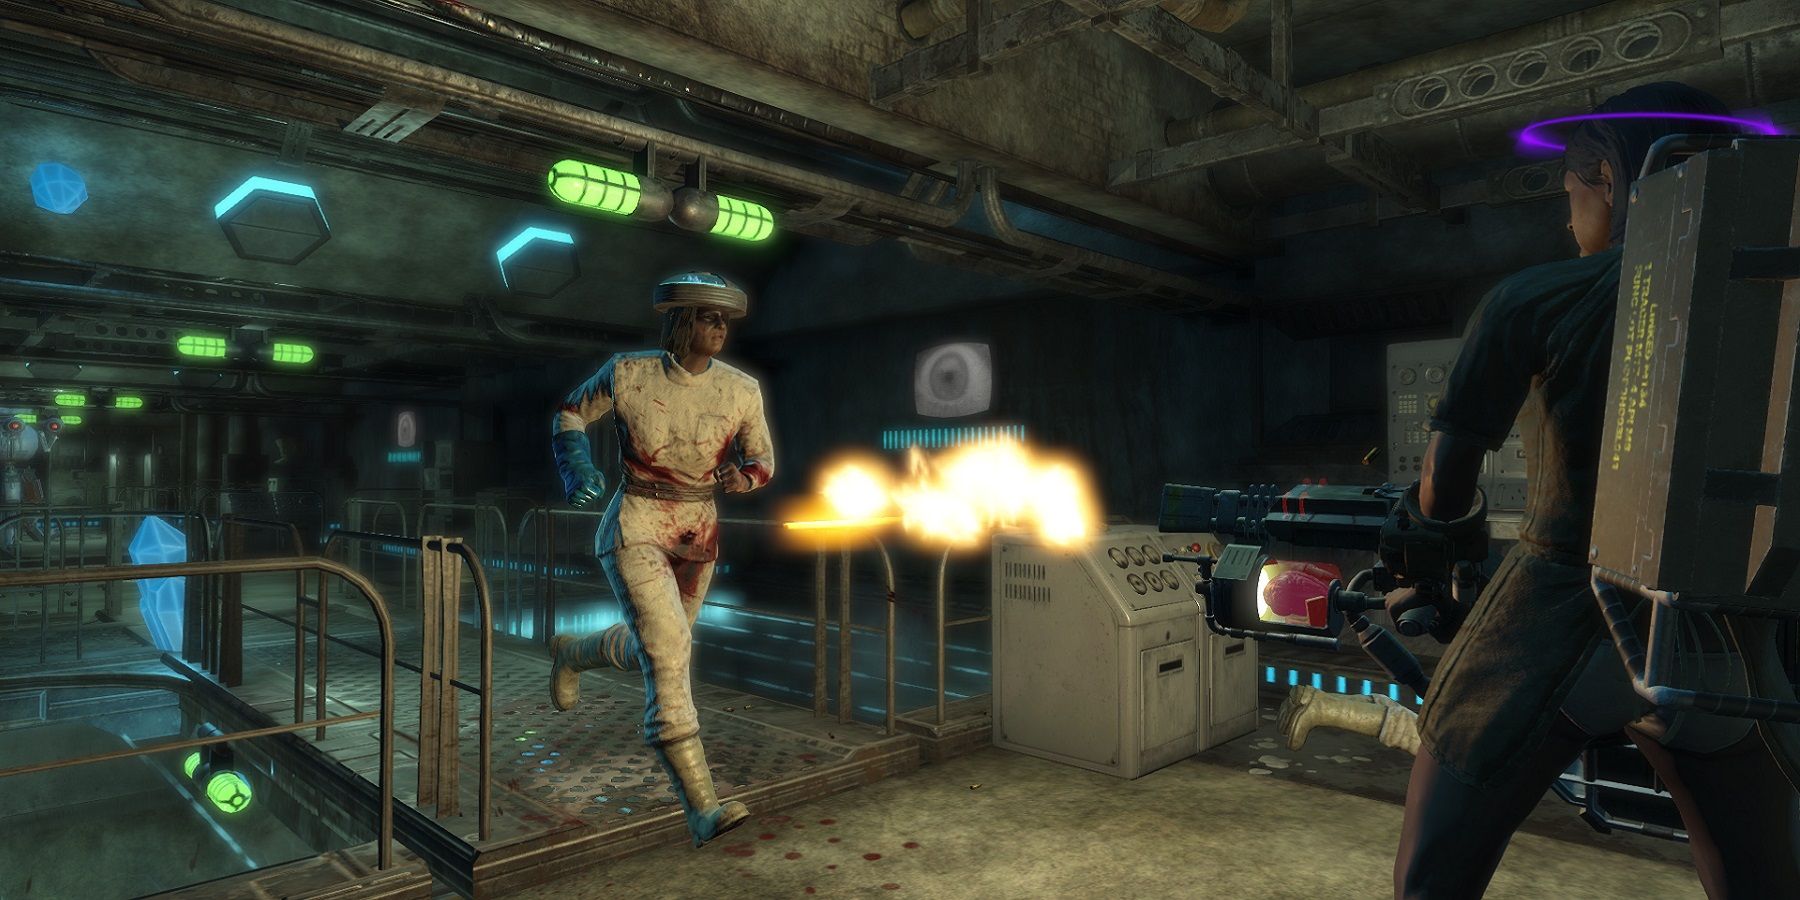 Fallout 4 Gets Fan-Made Mod Inspired by New Vegas DLC